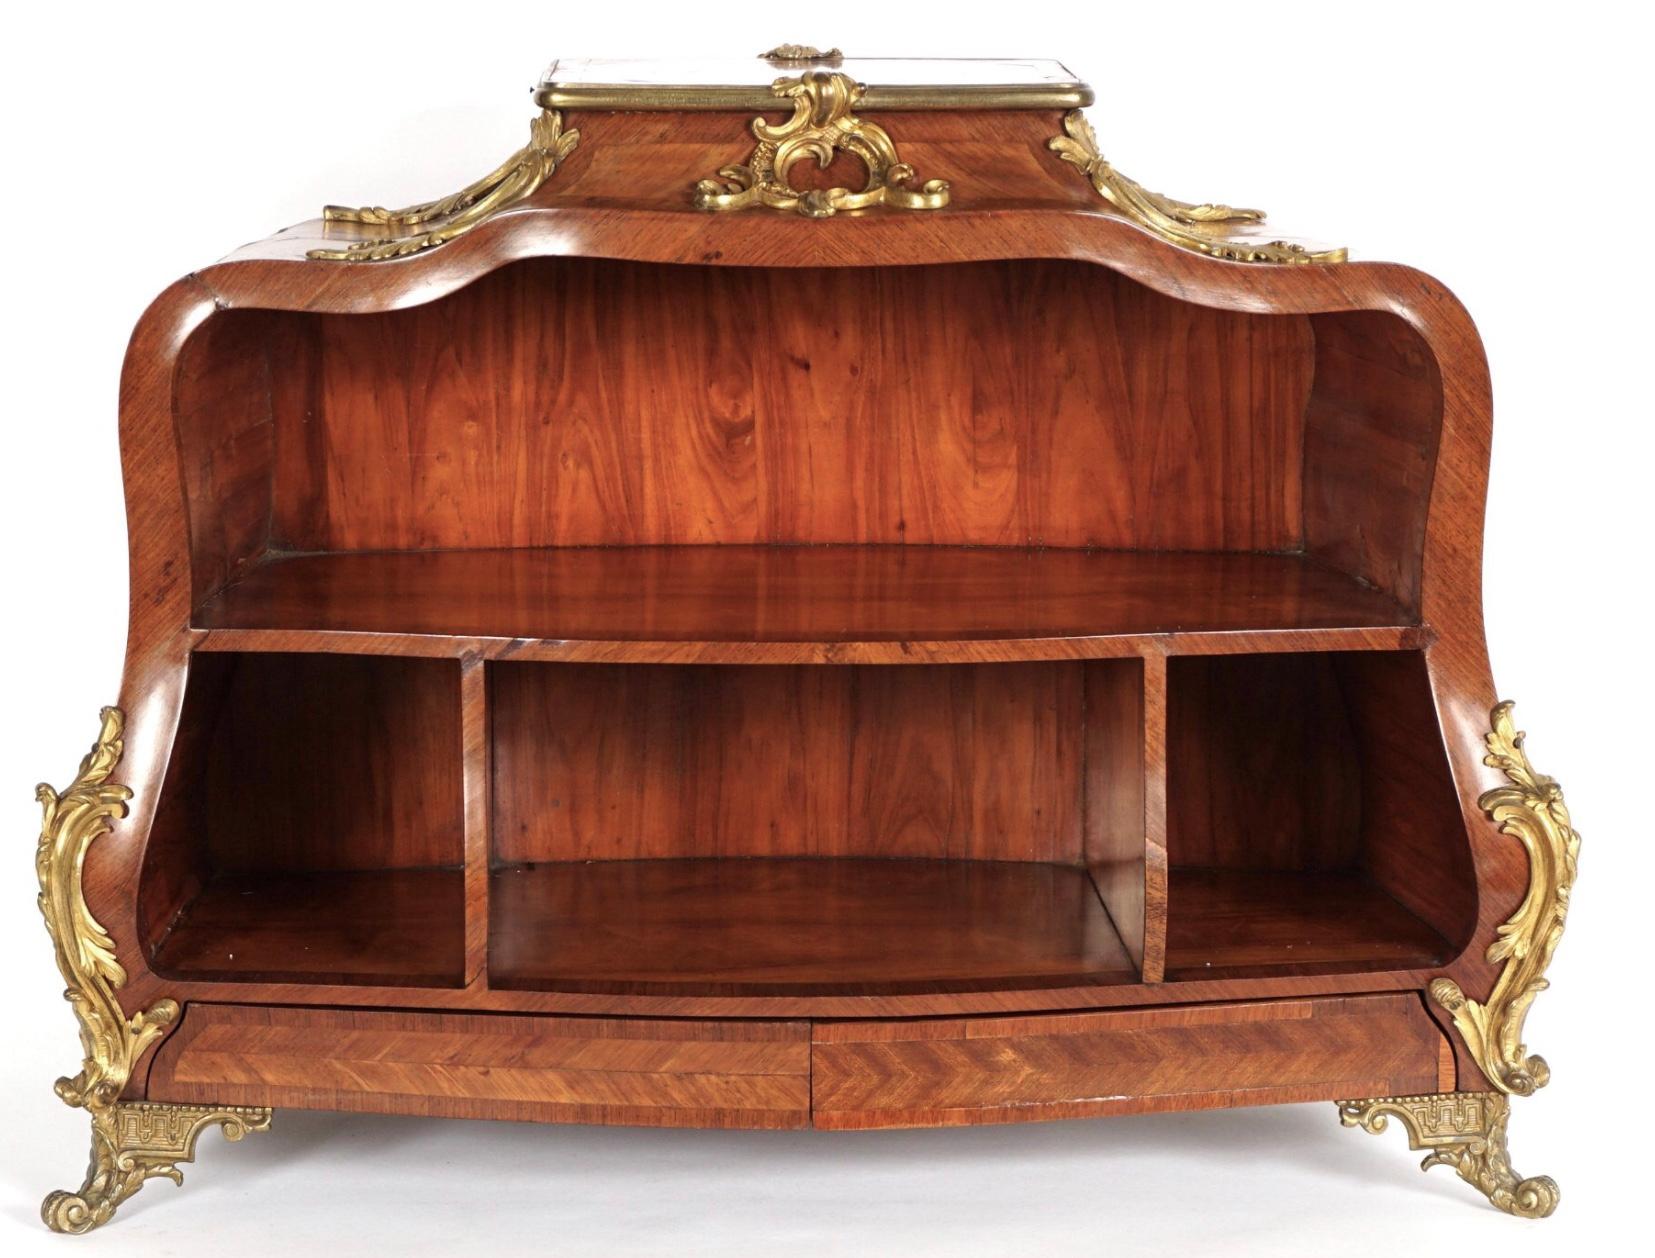 Very fine French Cartonnier, late 19th Century, Attributed to Francois Linke. Bombe form, parquetry inlaid case with applied fine ormolu decoration. Open shelf over segmented open shelf over two drawers.